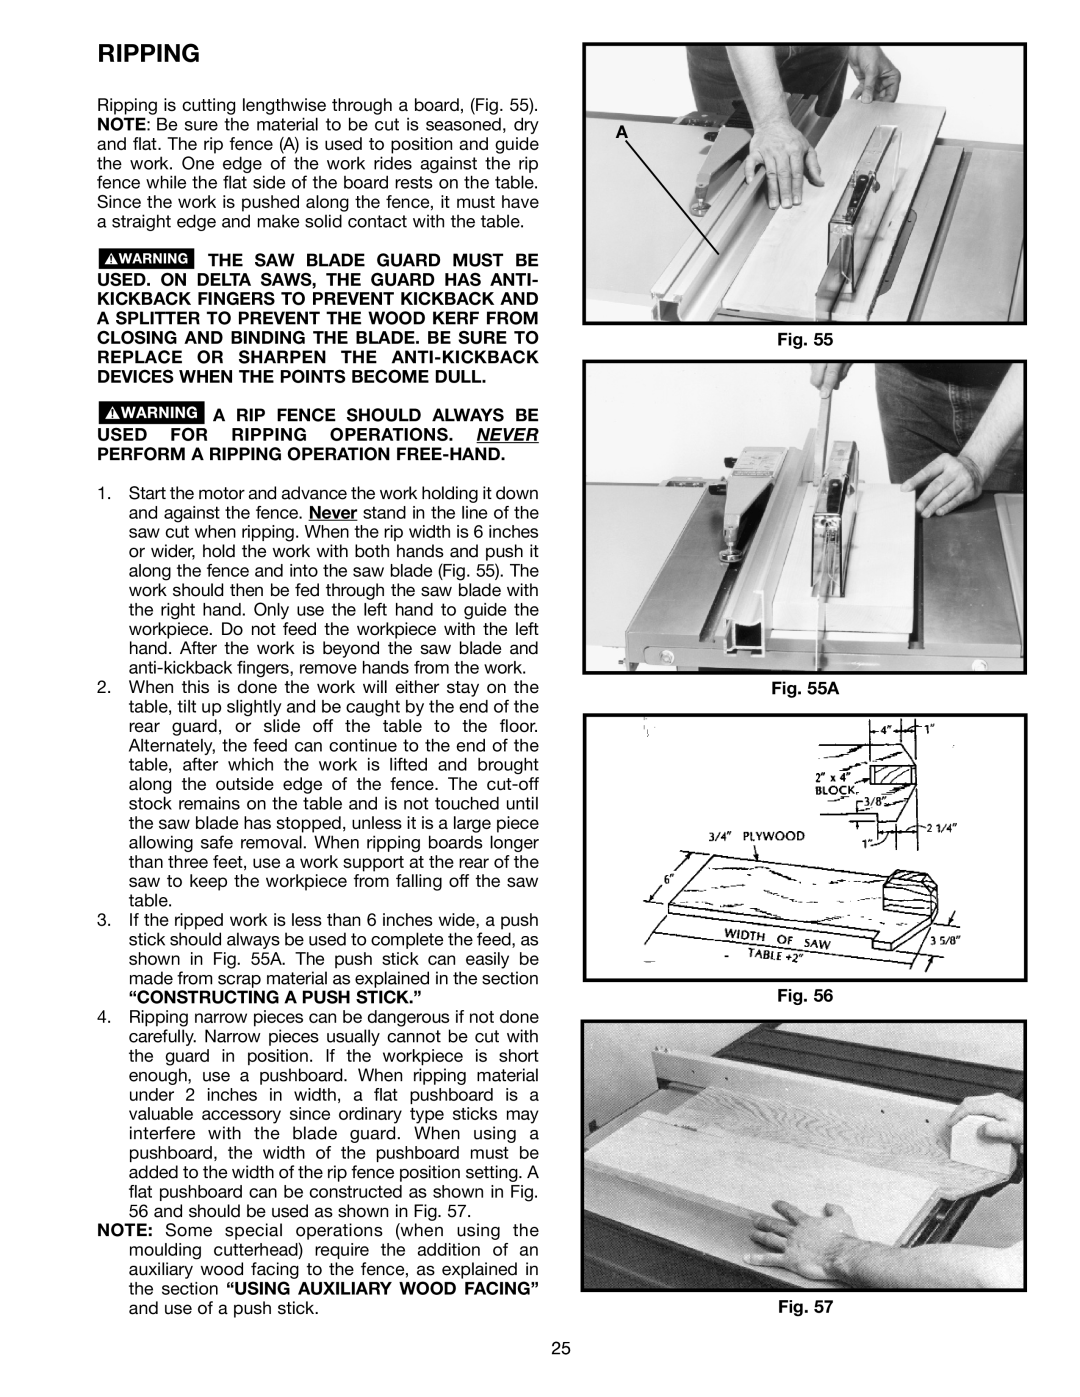 Porter-Cable 36-678, 36-649, 36-675, 36-679 instruction manual Ripping, “Constructing A Push Stick.” 